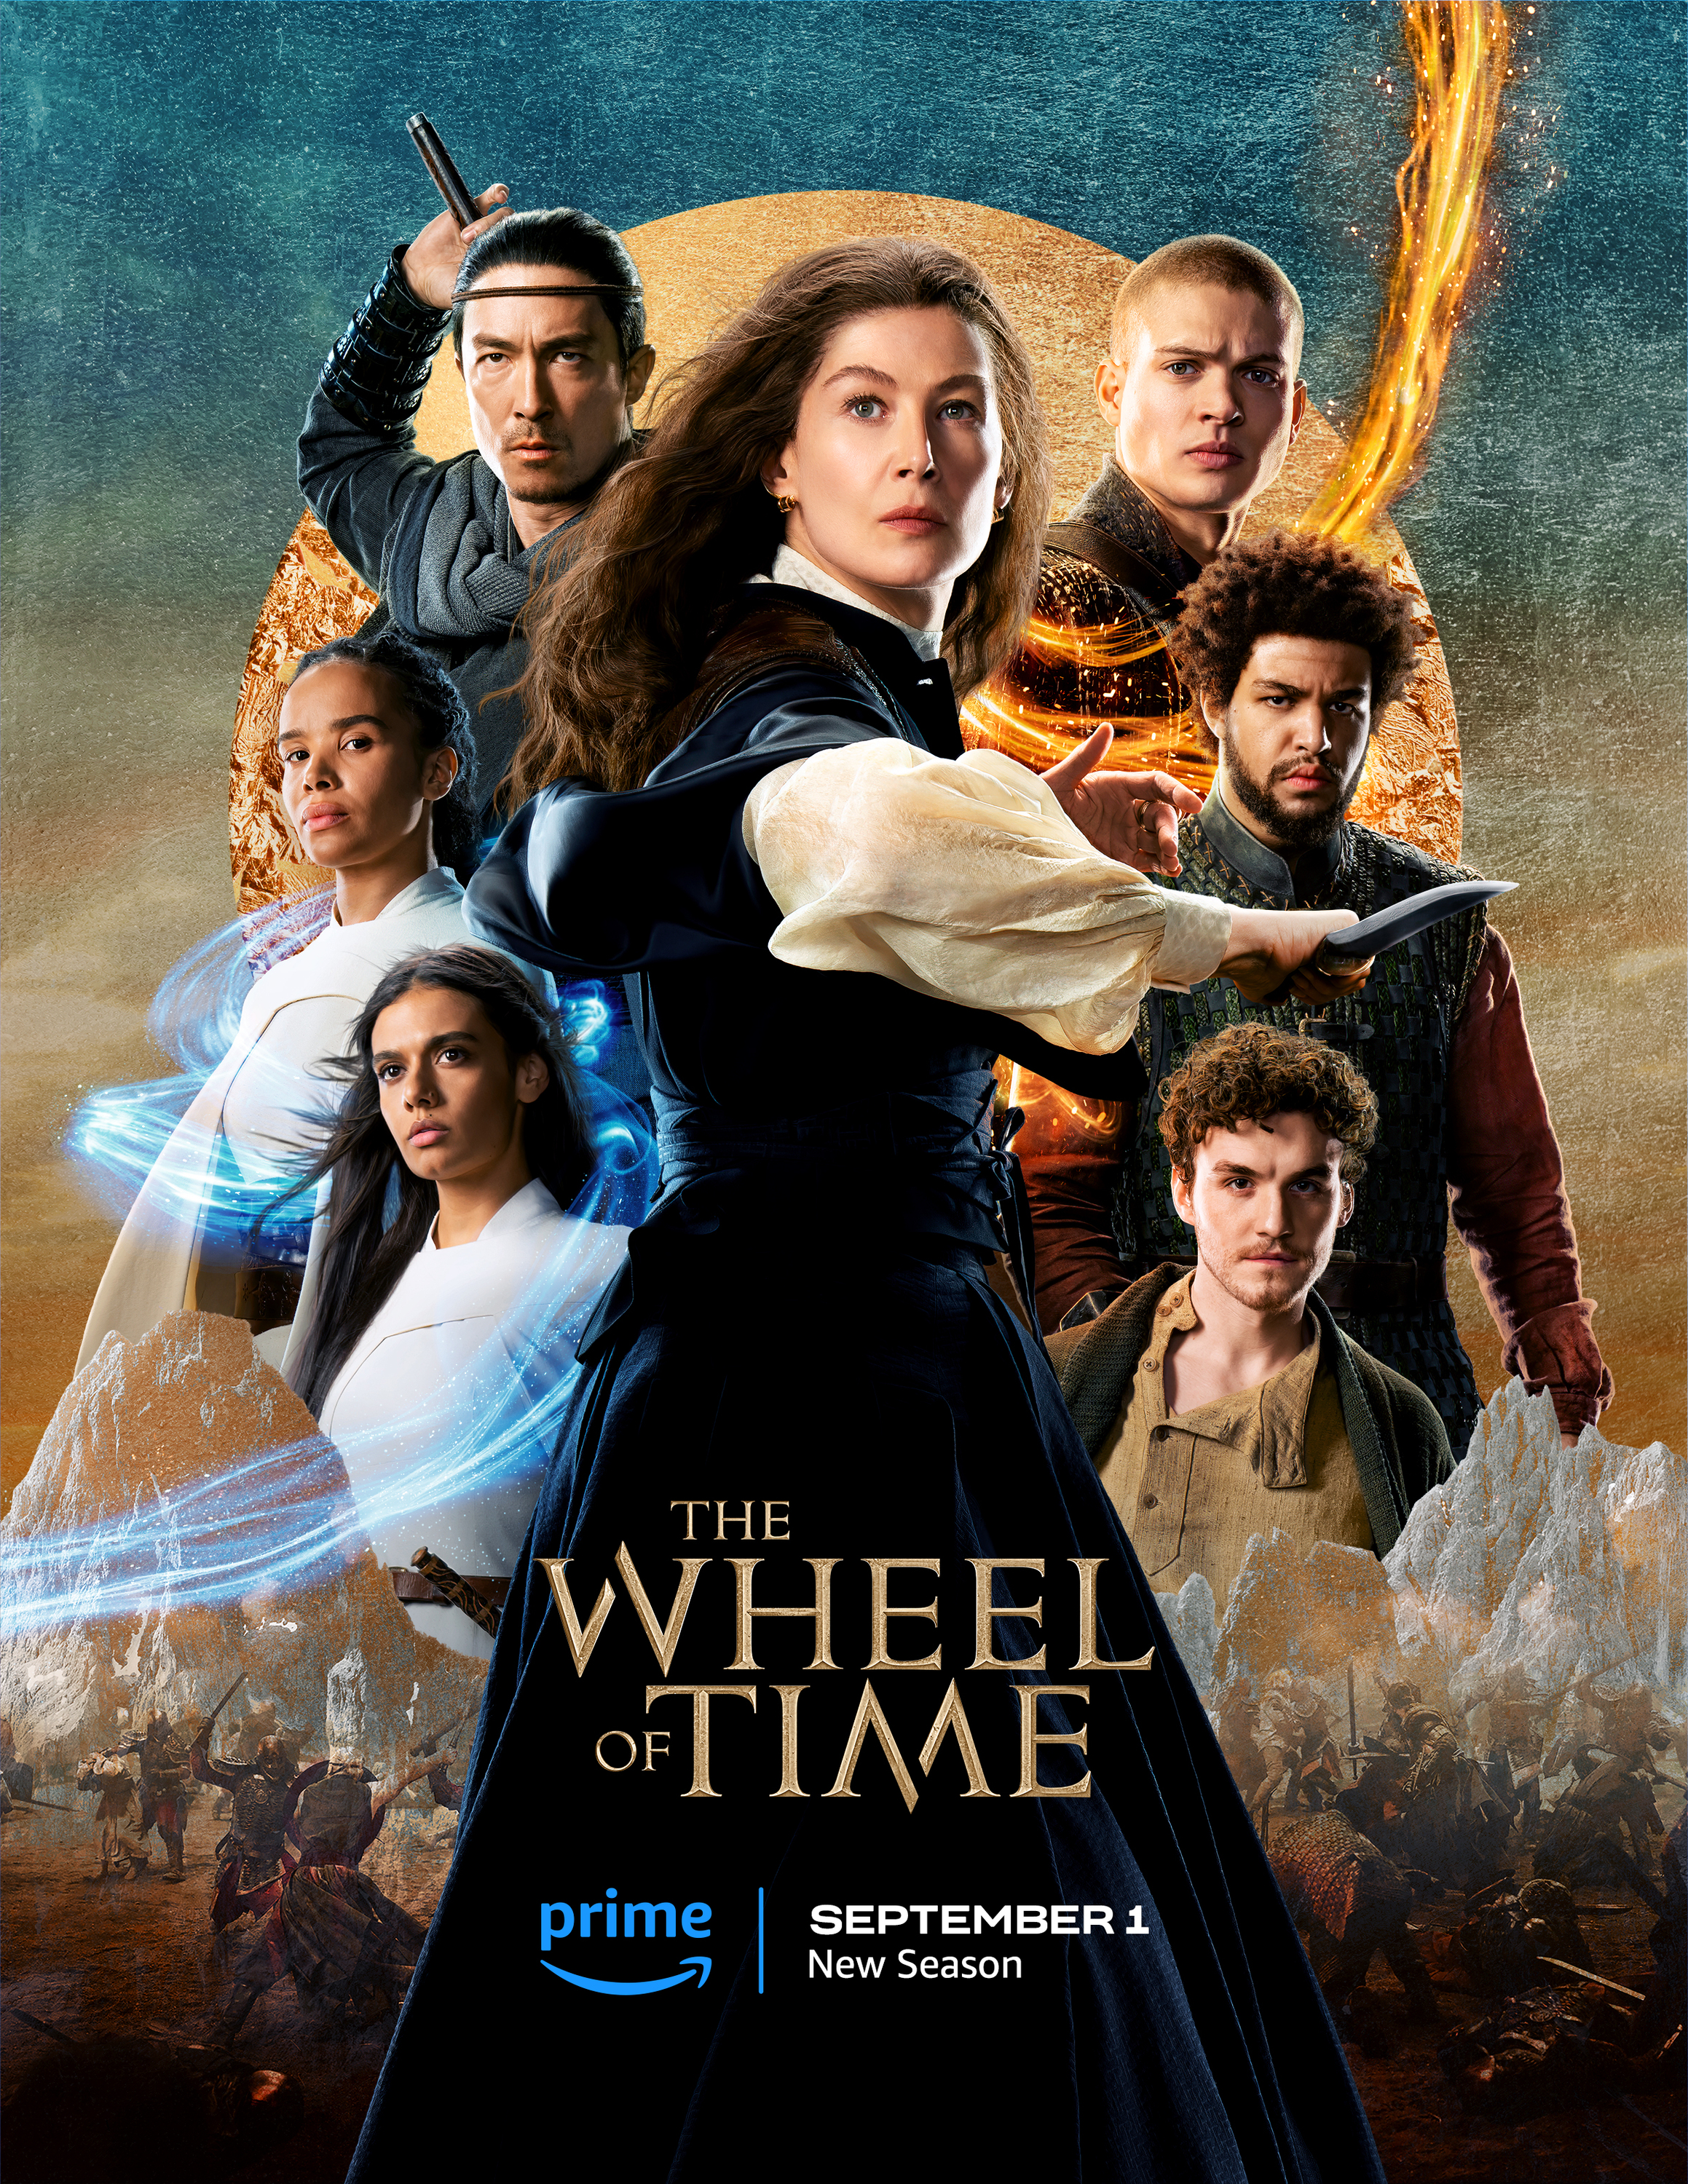 The Wheel of Time season 2 poster. Courtesy of Prime Video.